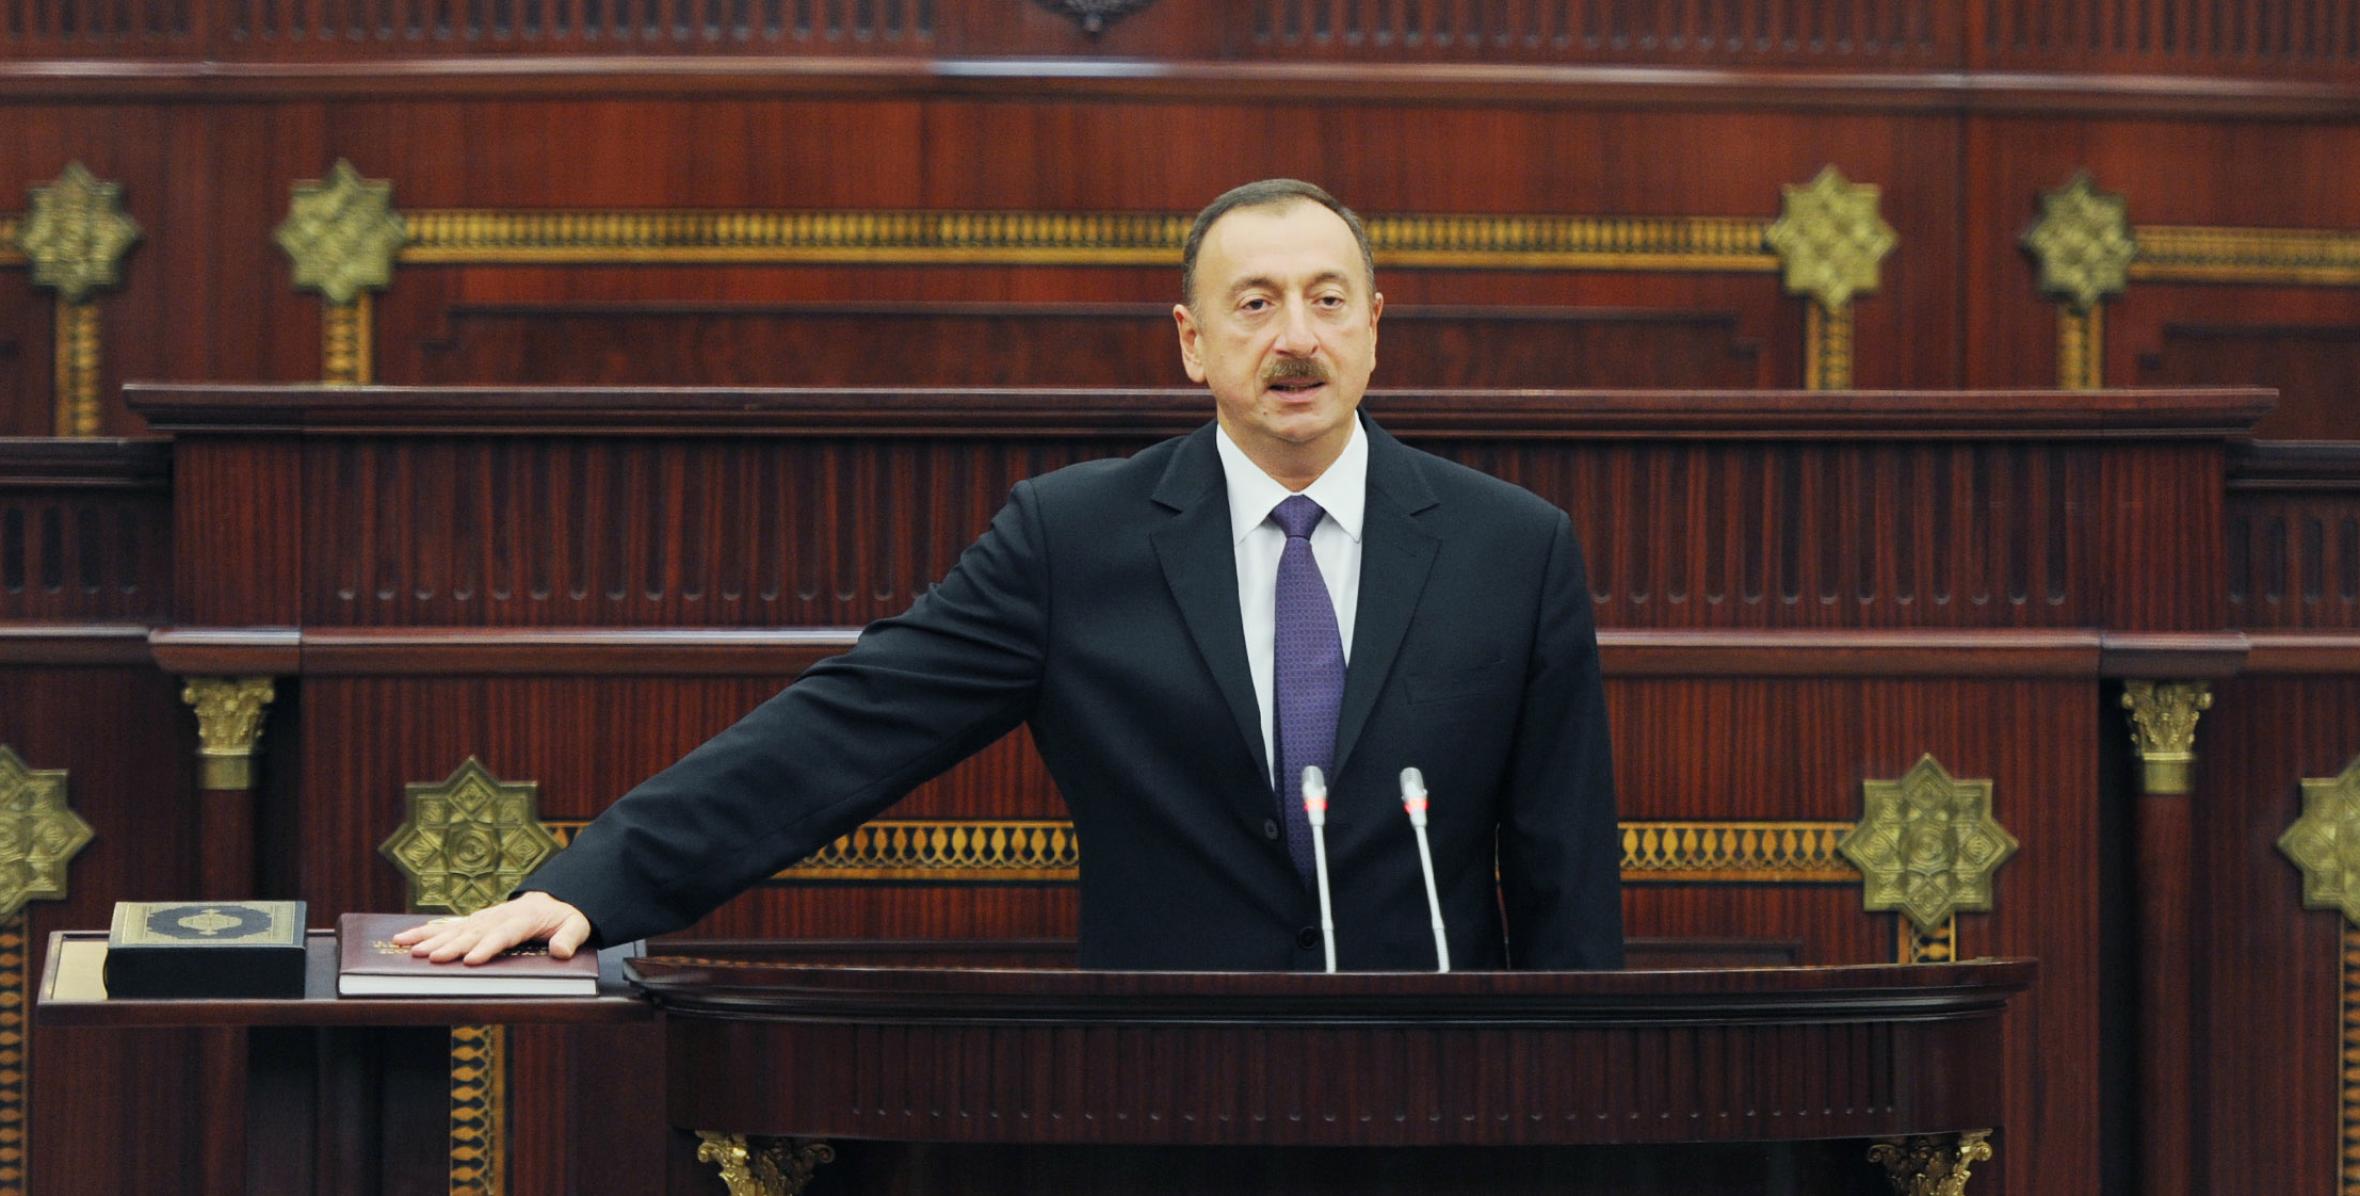 Official inauguration of Ilham Aliyev, who has been elected President of the Republic of Azerbaijan, was held